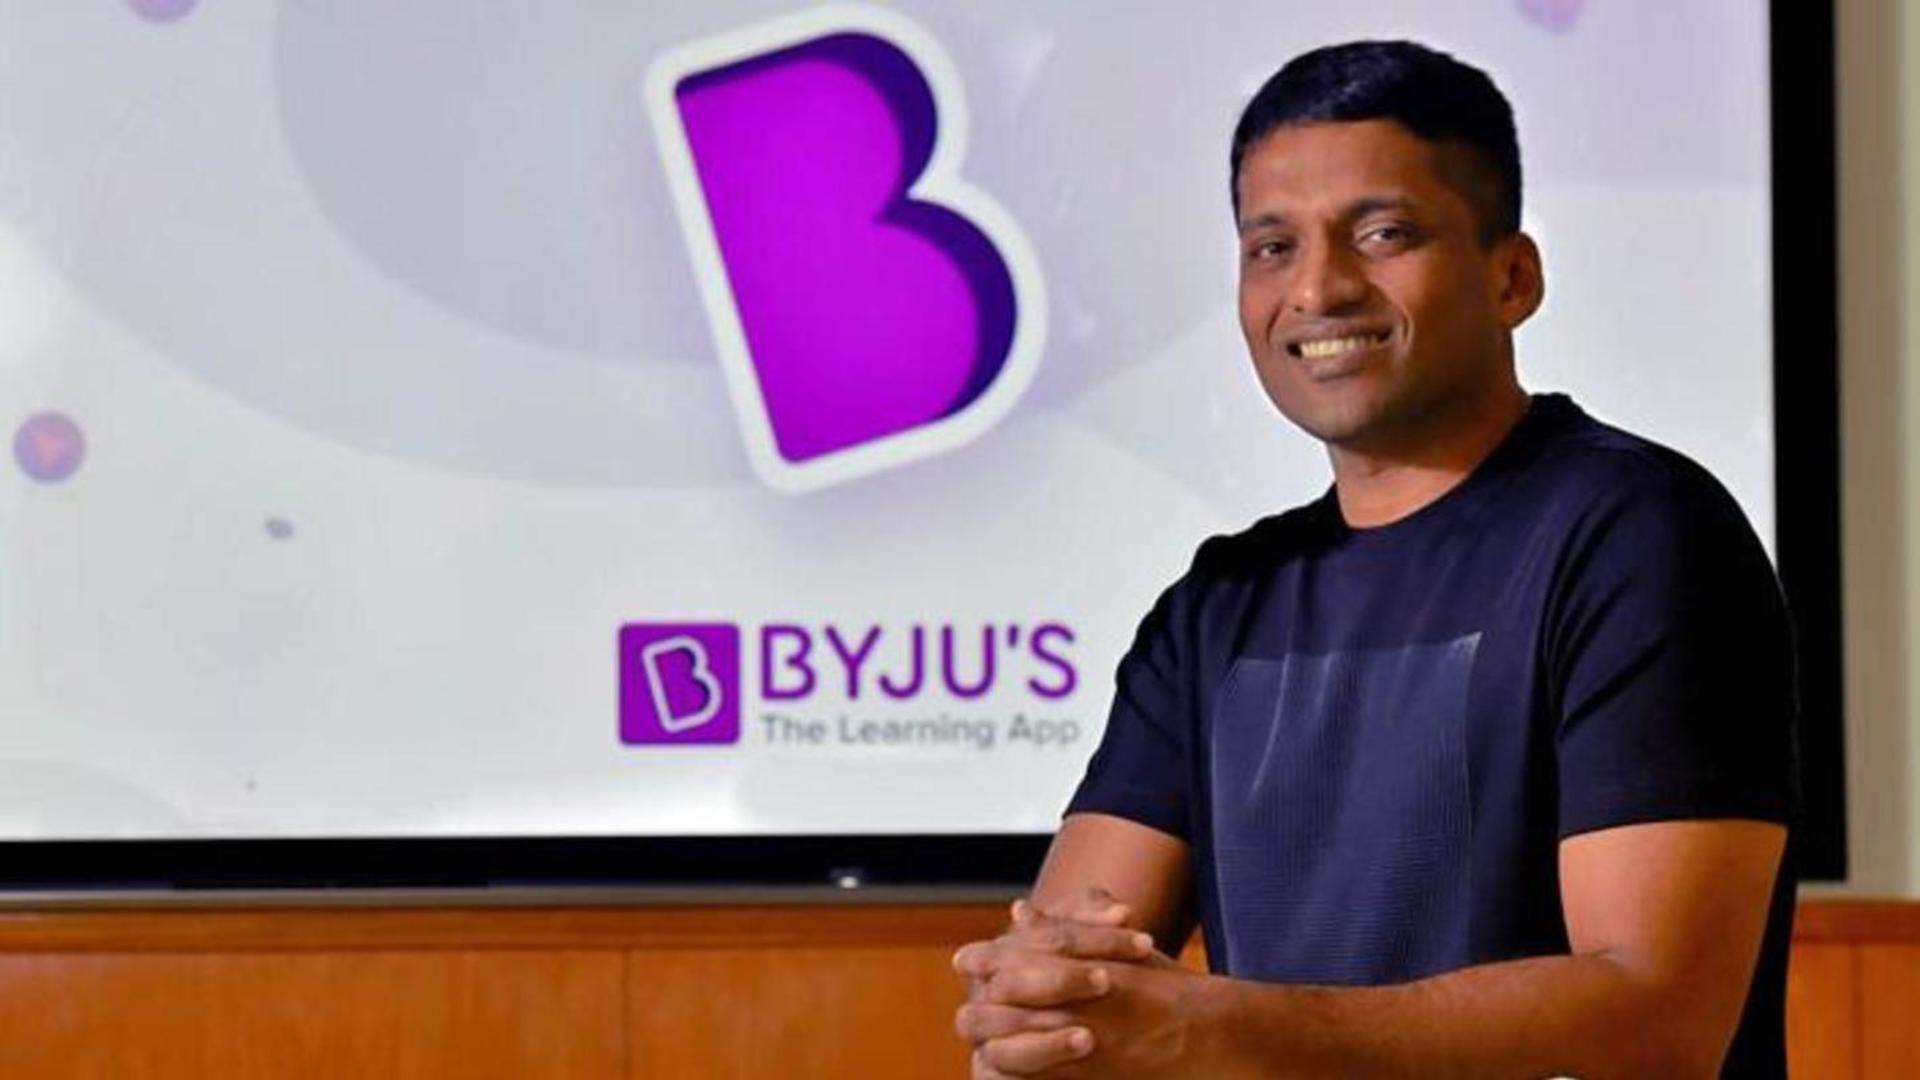 ED searches BYJU'S CEO's premises over violating foreign funding laws